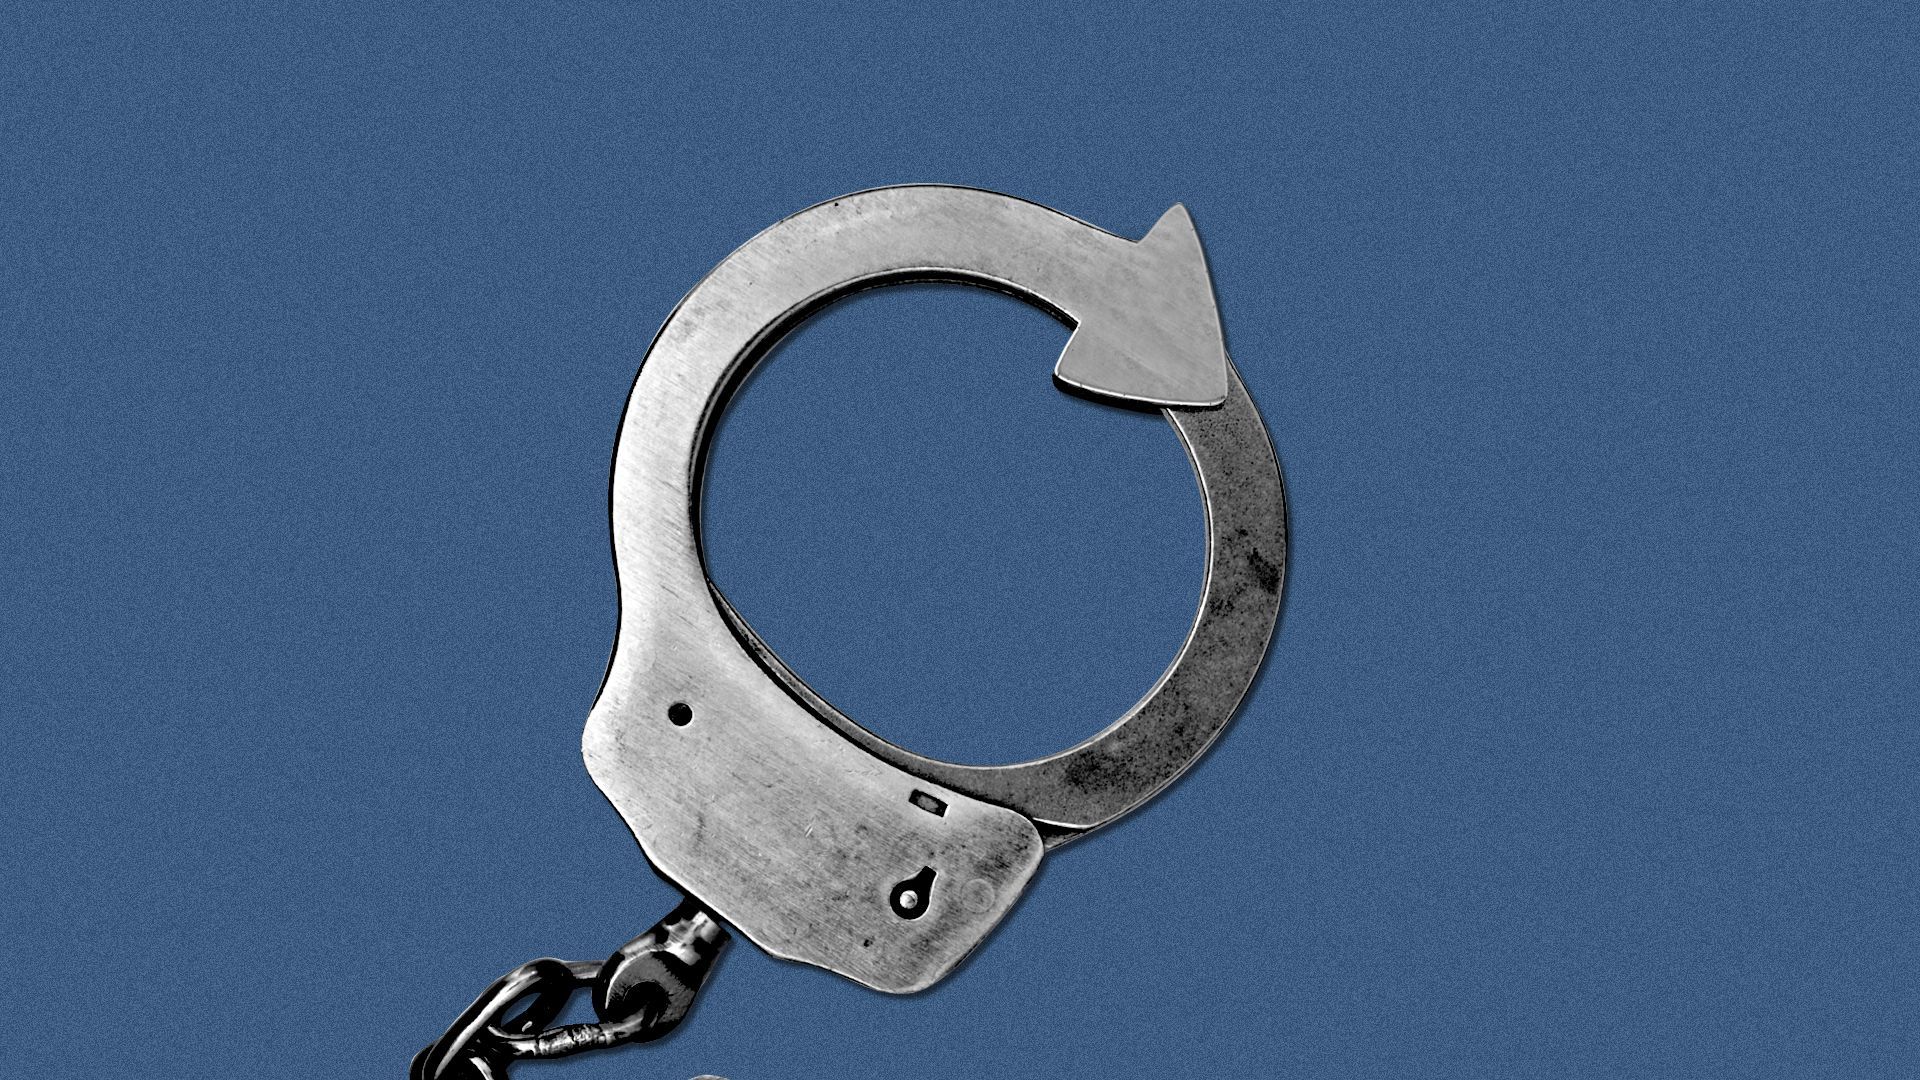 Illustration of a handcuff in the shape of a circular arrow.